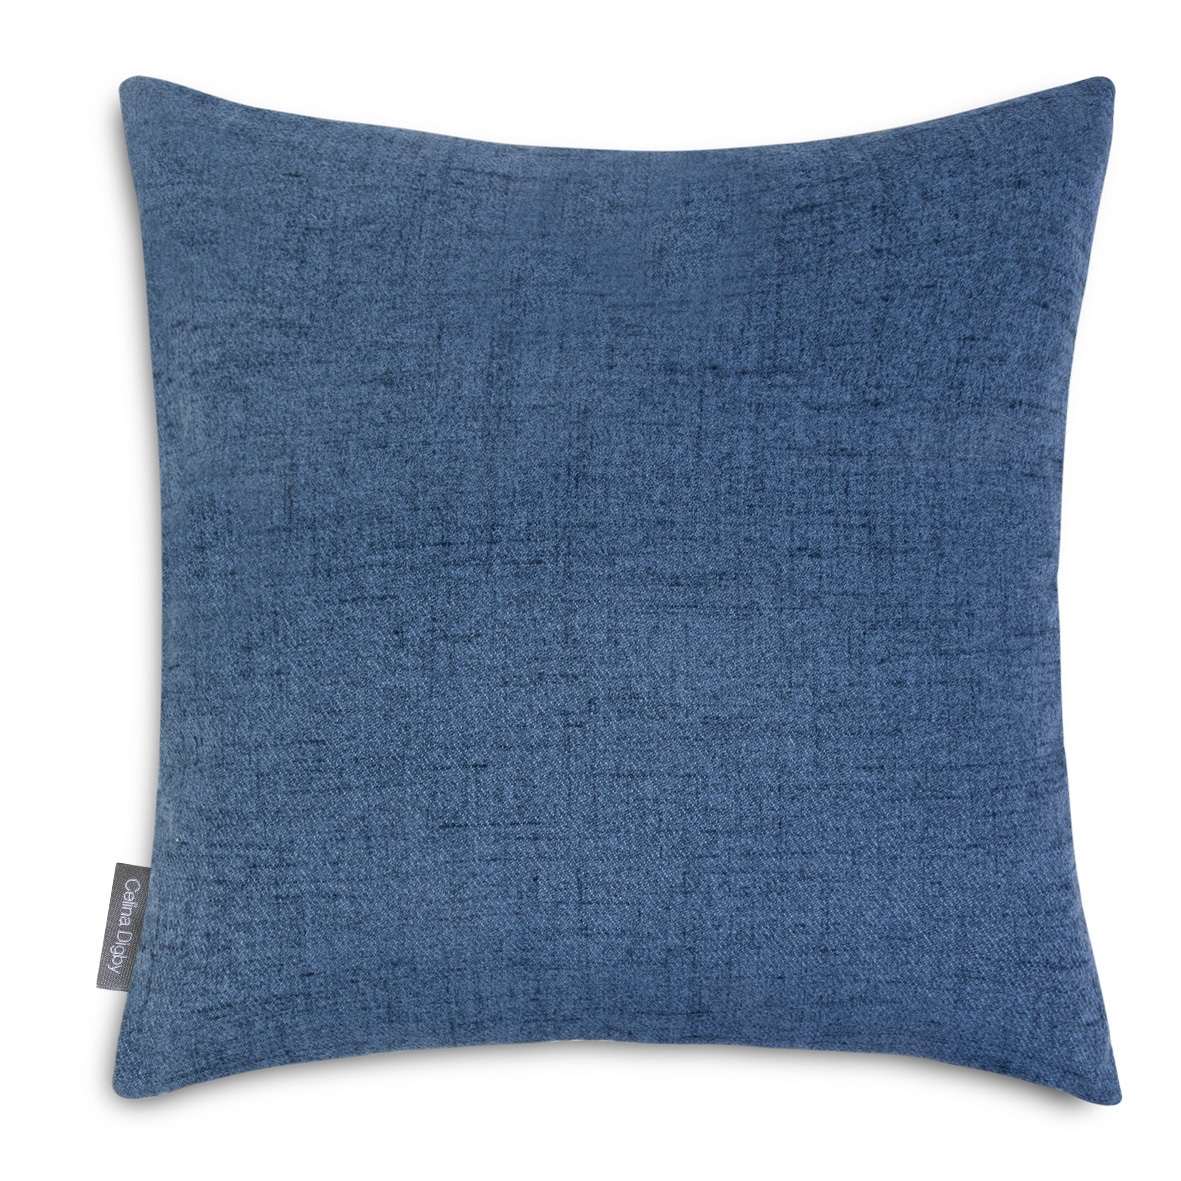 Celina Digby Luxury Wool Effect Cushion – Denim Blue (Available in 2 Sizes) Standard (45x45cm) Hollow Fibre Filling